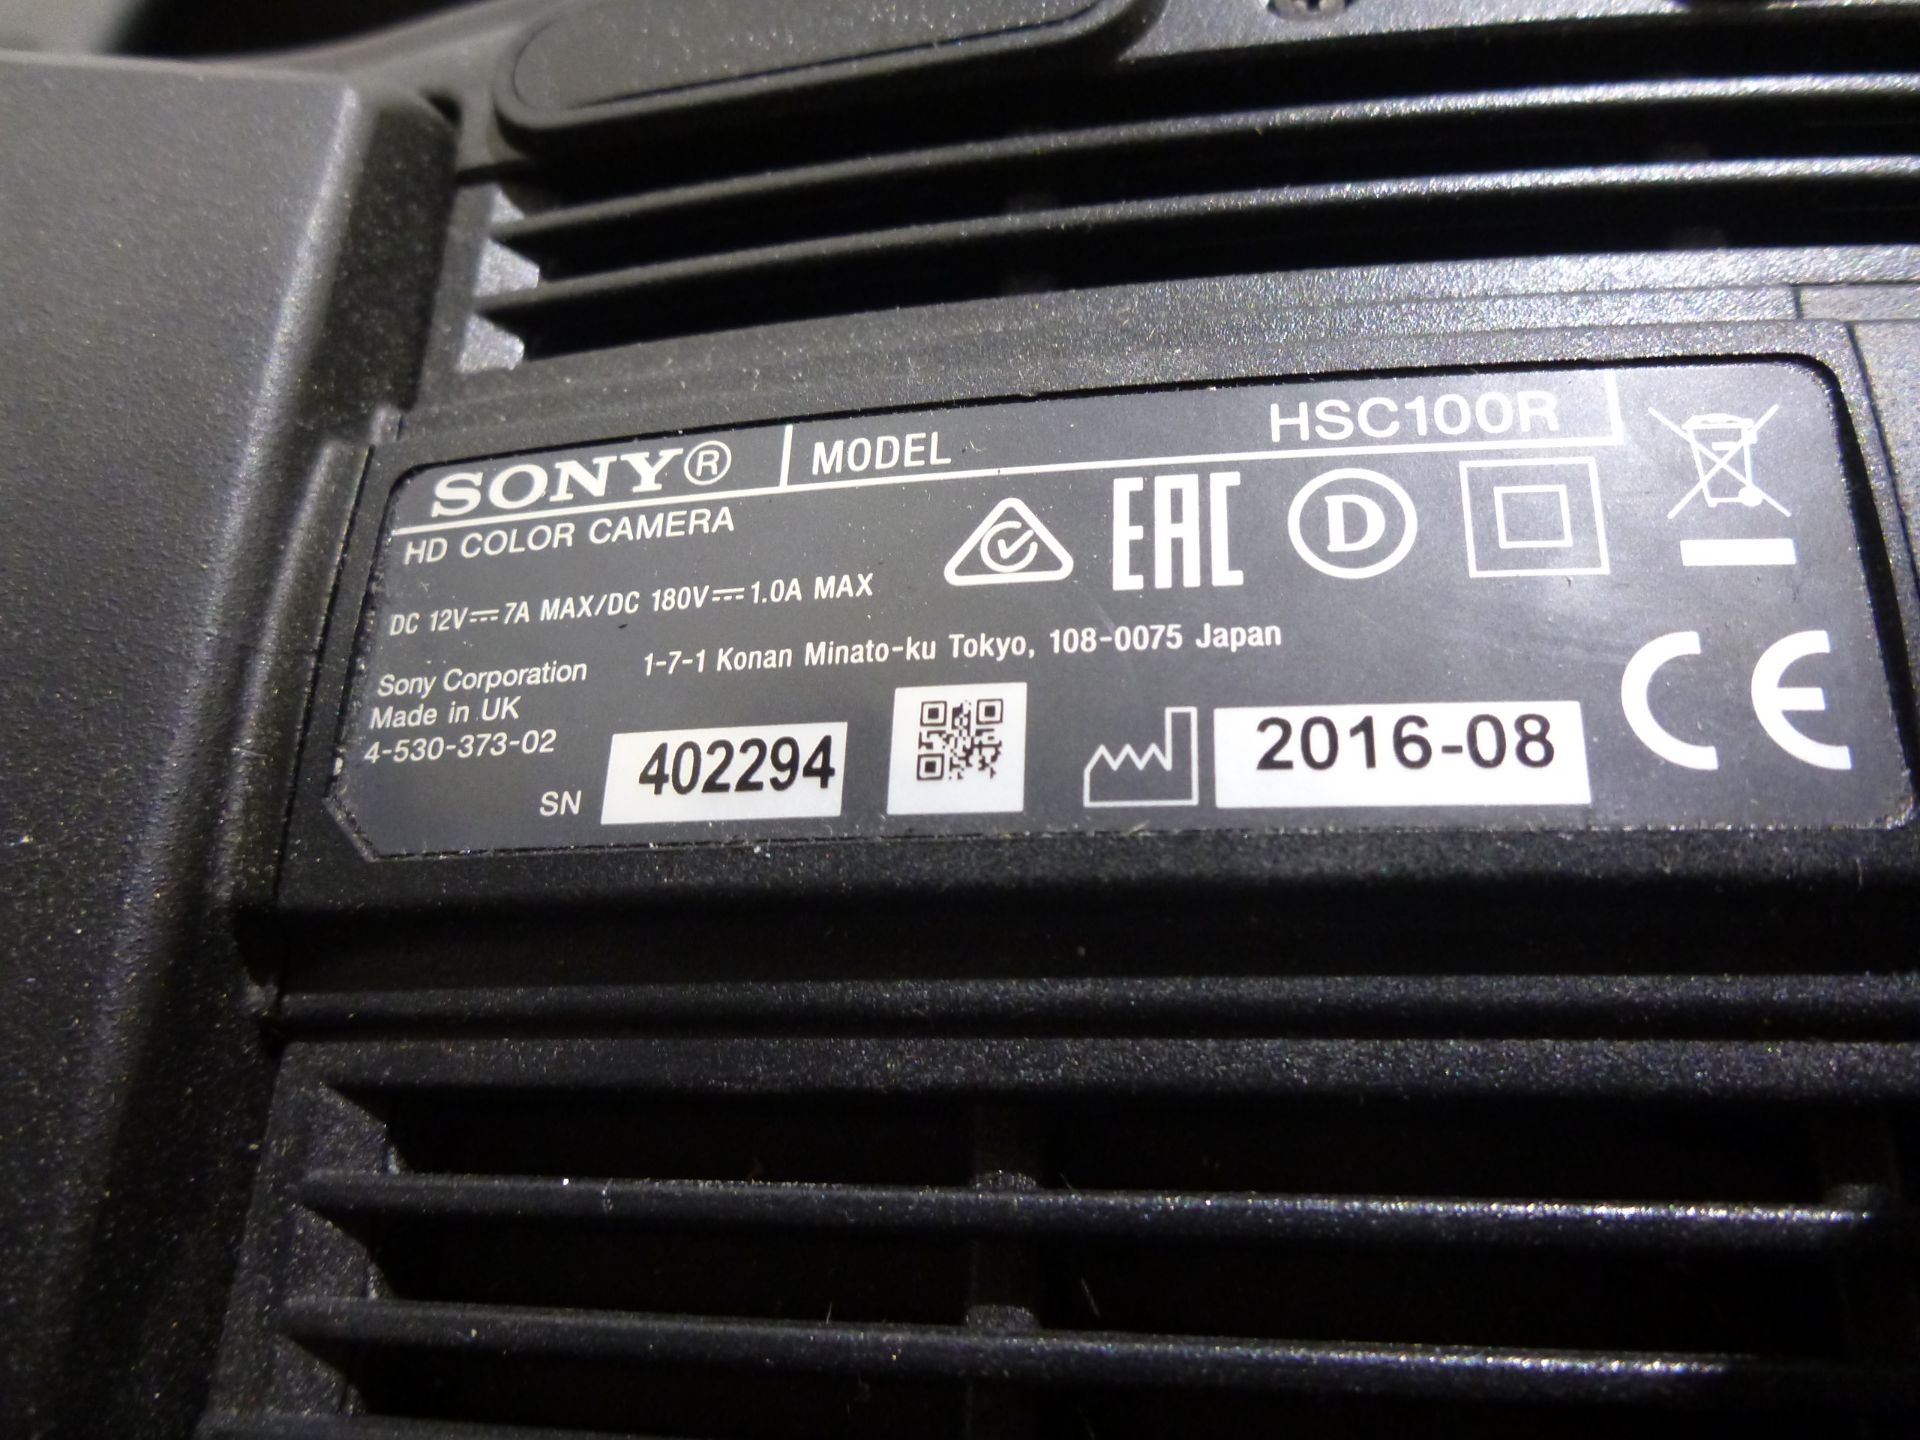 Sony HD Colour Broadcast Camera, Model HSC100R, S/N 402294, YOM 2016, Camera includes Canon HDTV - Image 10 of 27